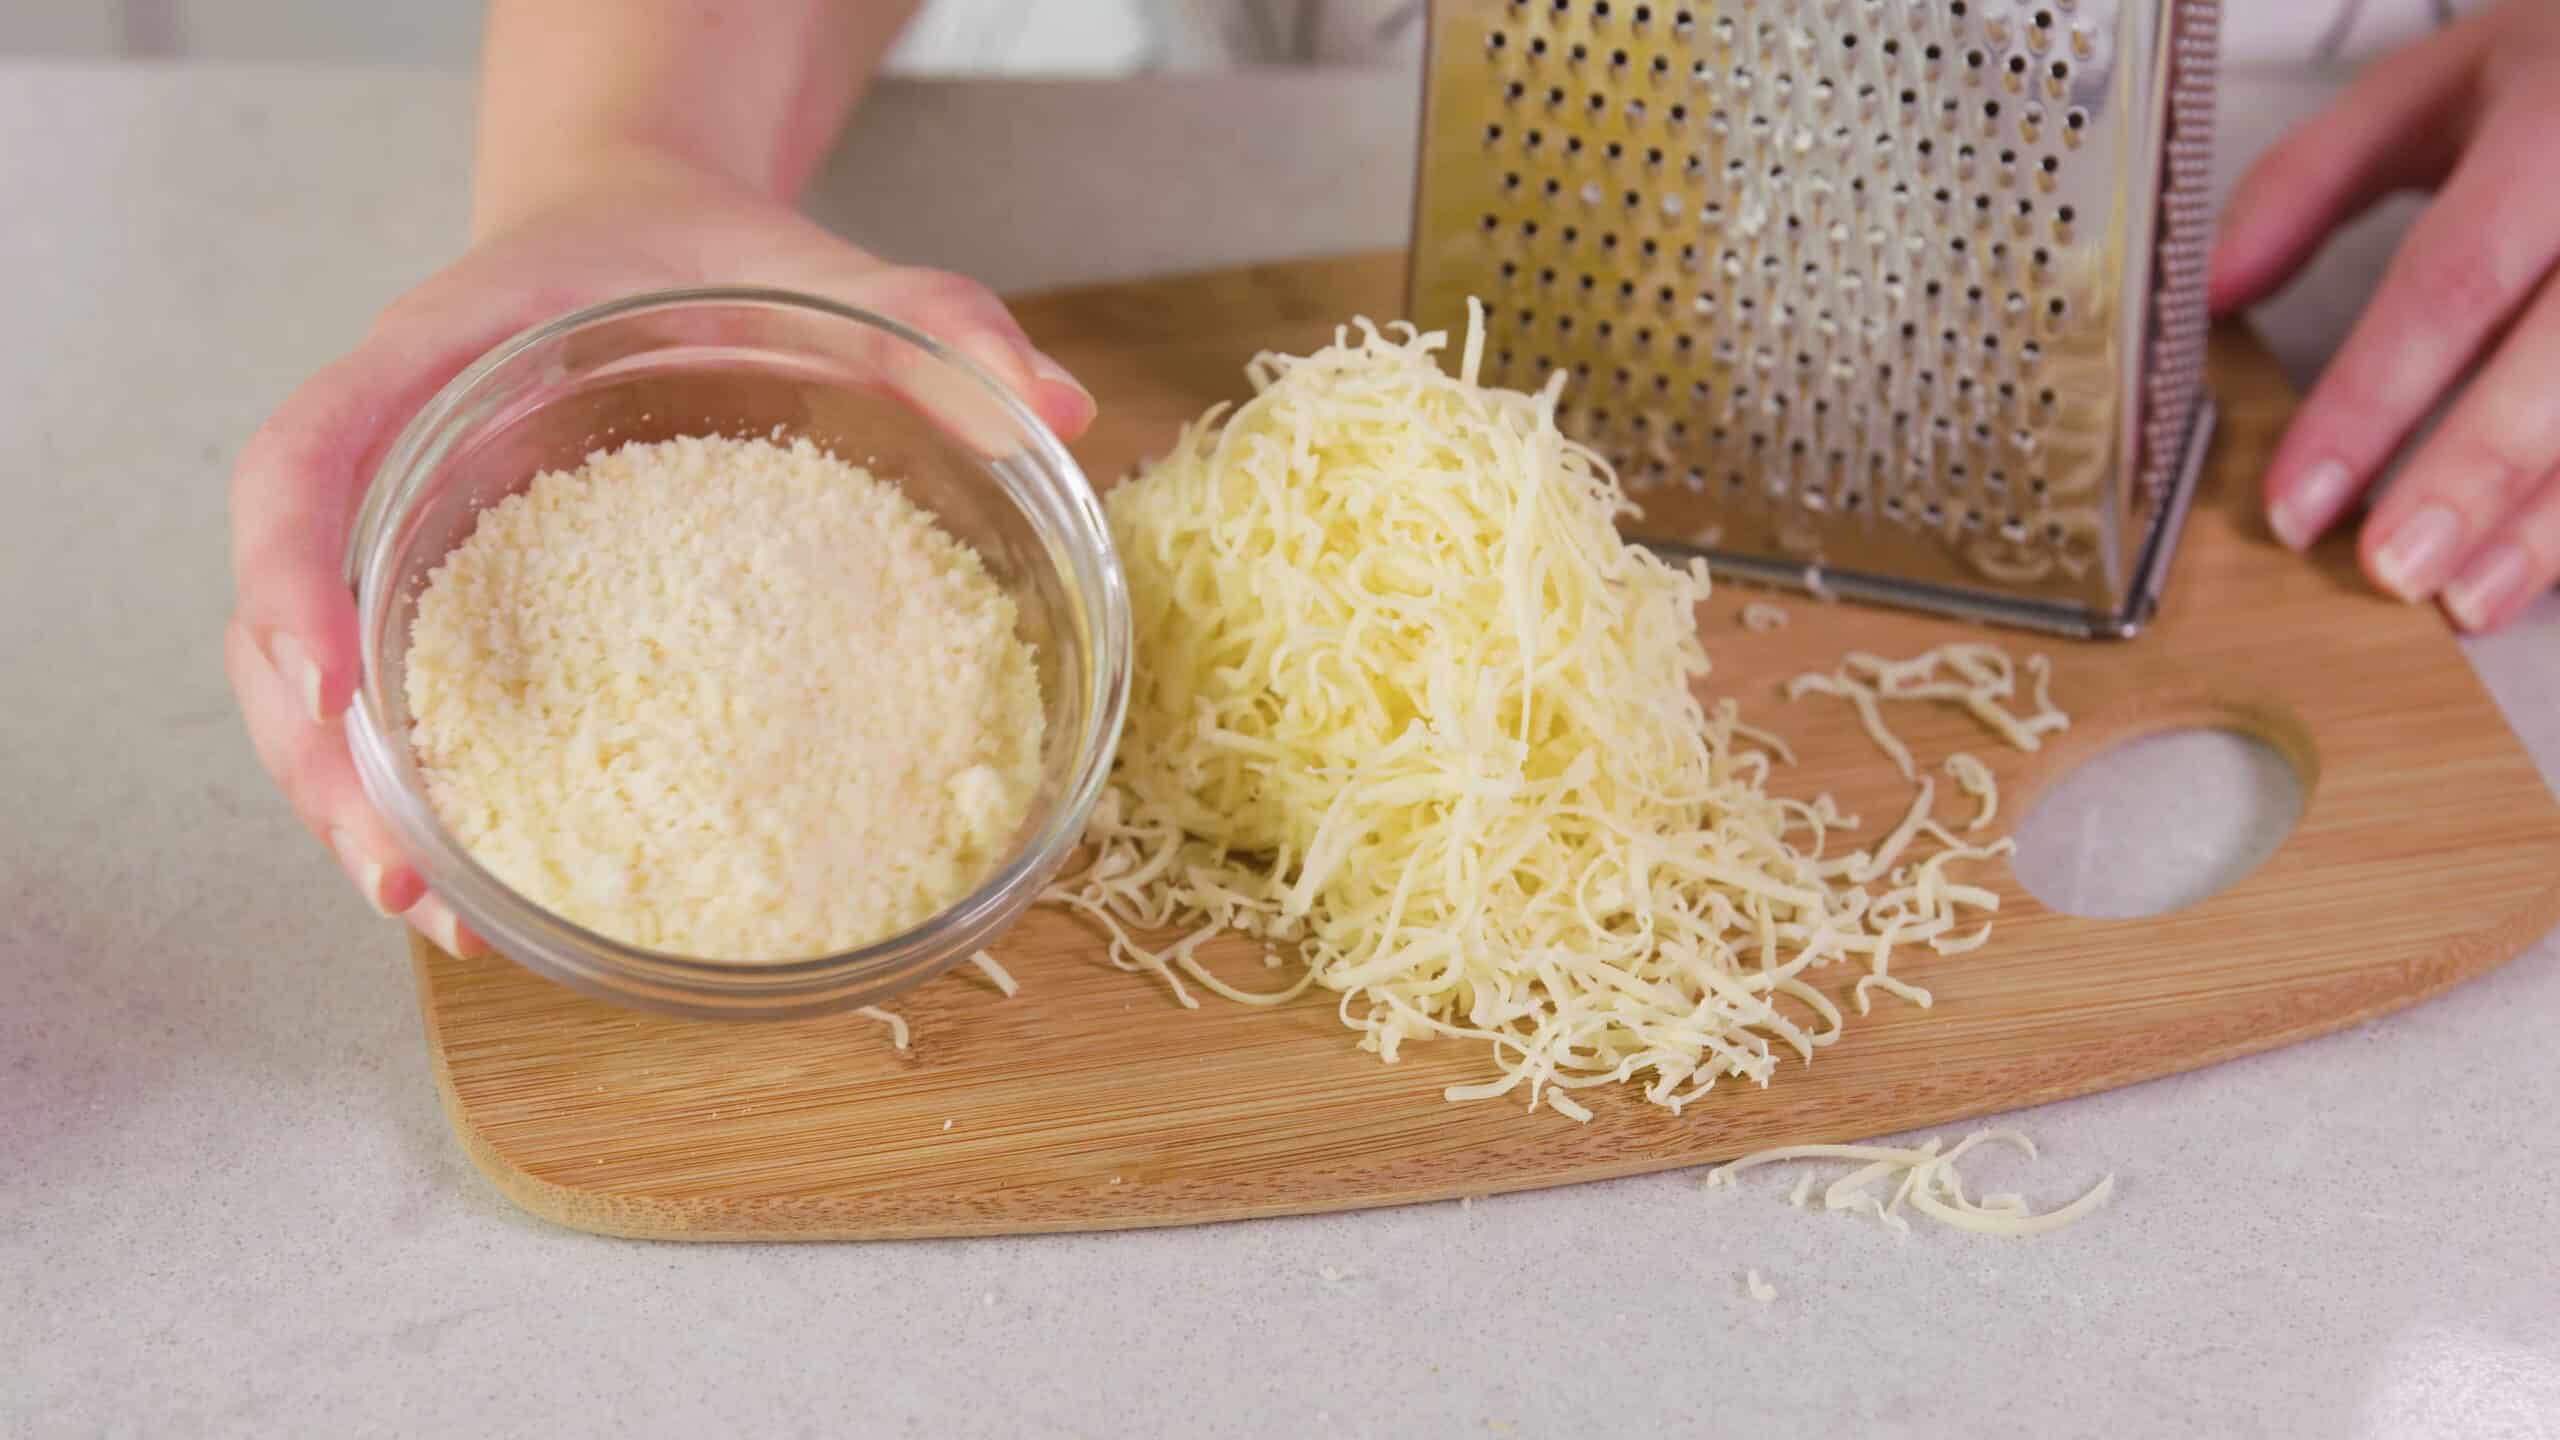 Using the small side of the cheese shredder, shred some white cheddar cheese onto a cutting board with a small clear bowl of parmesan cheese to the side.